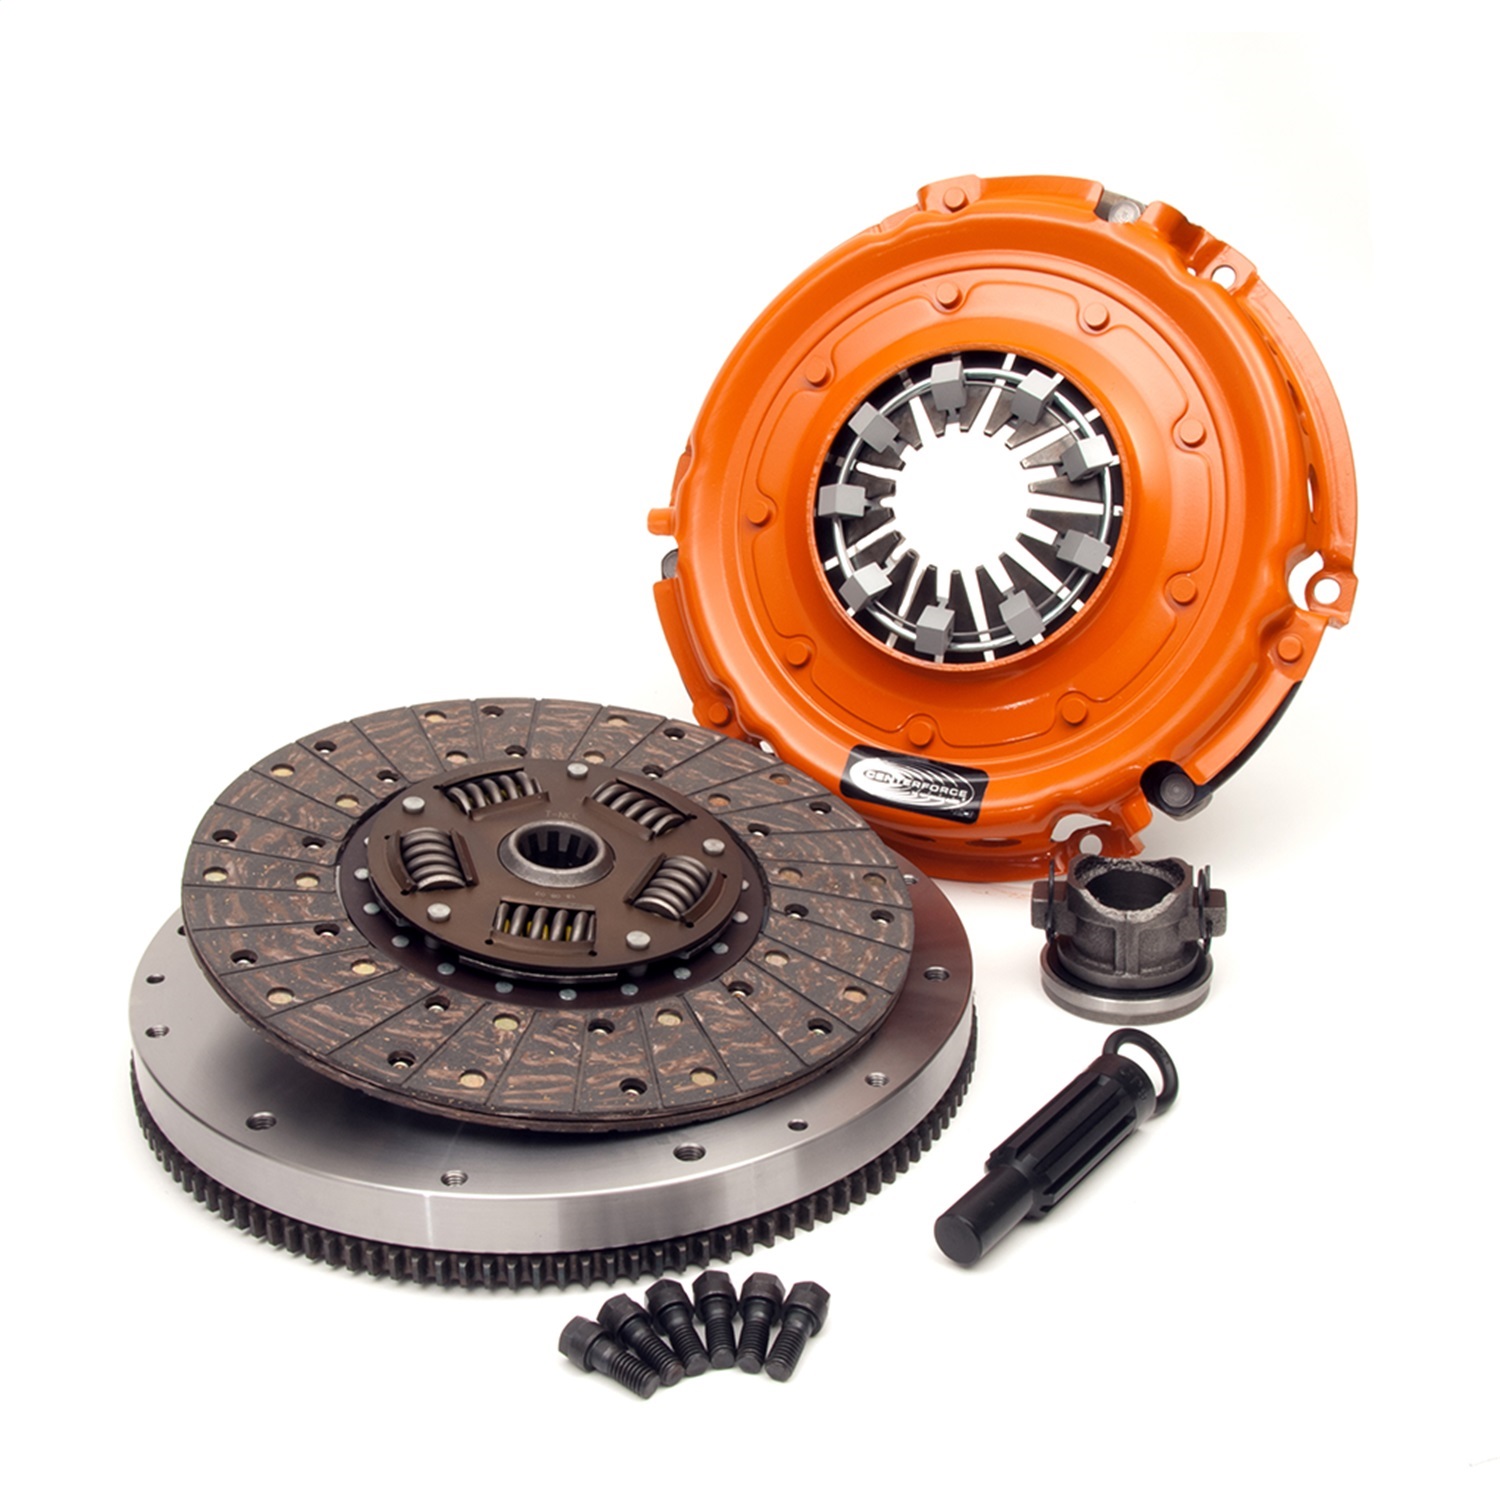 Centerforce Centerforce KCFT379176 Centerforce II; Clutch Pressure Plate And Disc Set